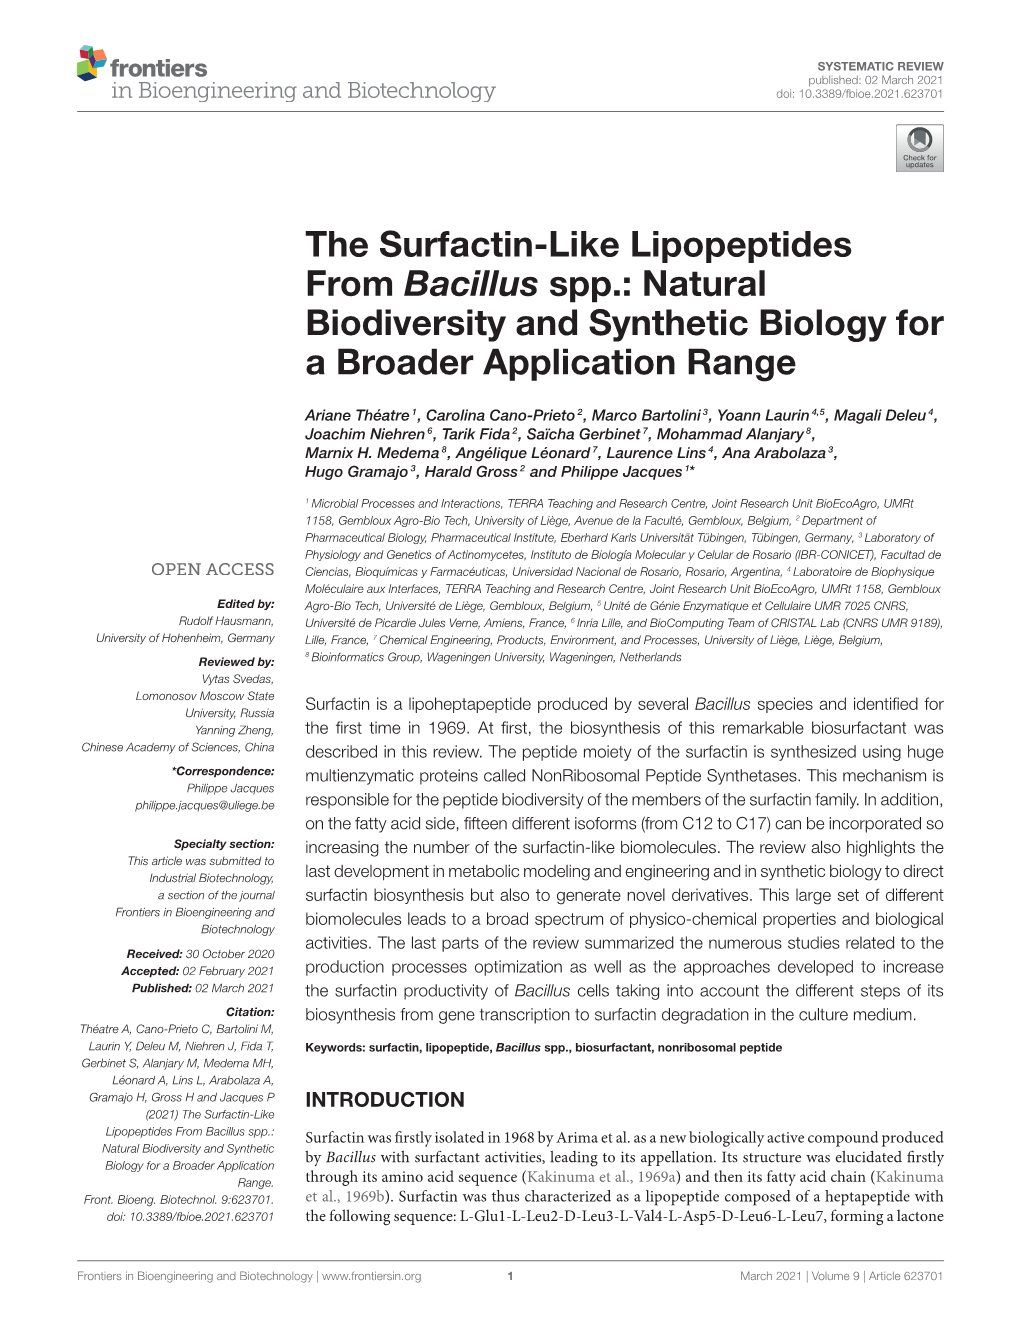 The Surfactin-Like Lipopeptides from Bacillus Spp.: Natural Biodiversity and Synthetic Biology for a Broader Application Range